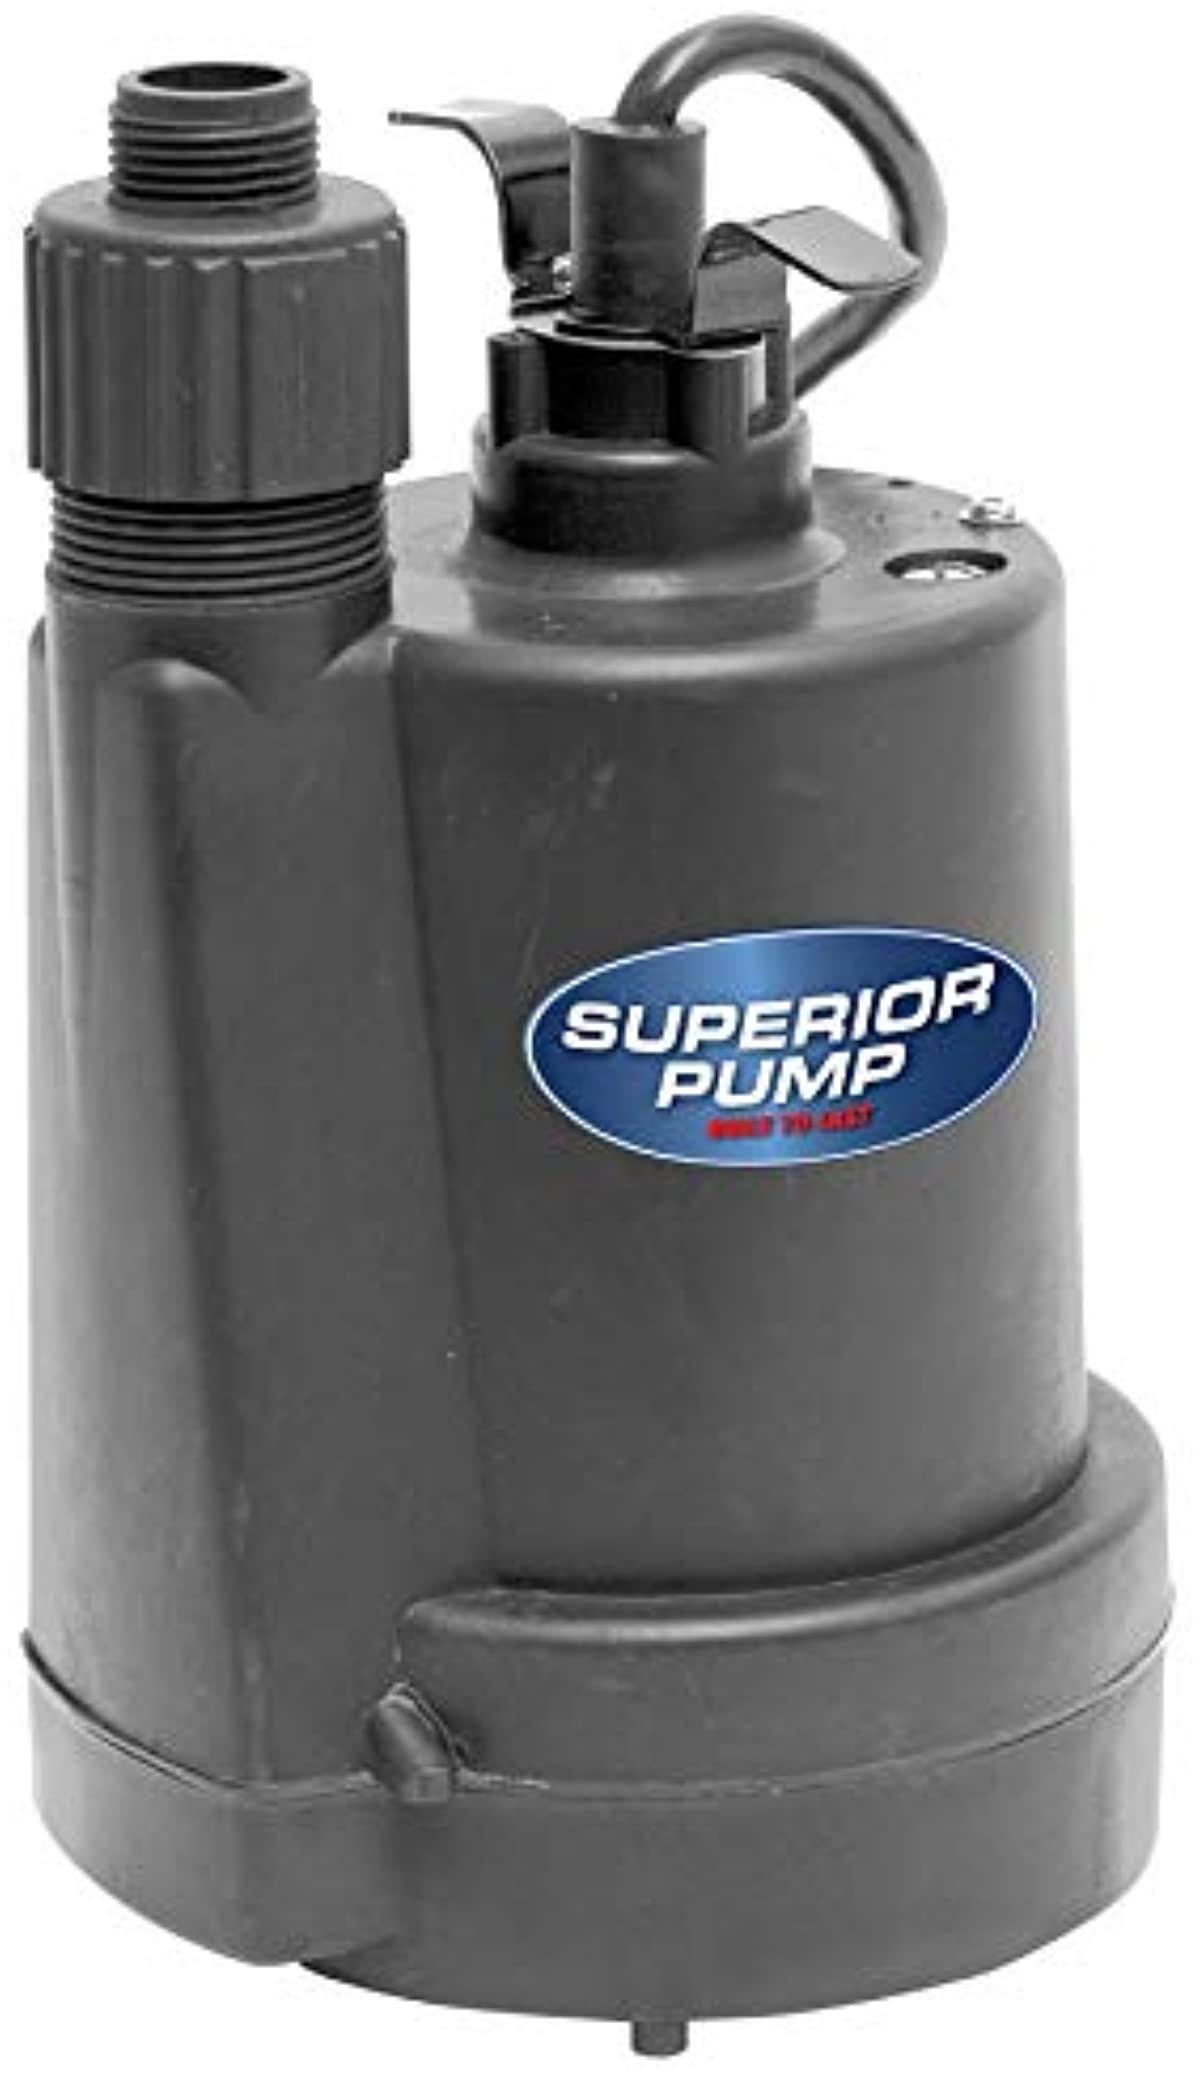 Superior Pump Thermoplastic Submersible Utility Pump - 1/4 HP